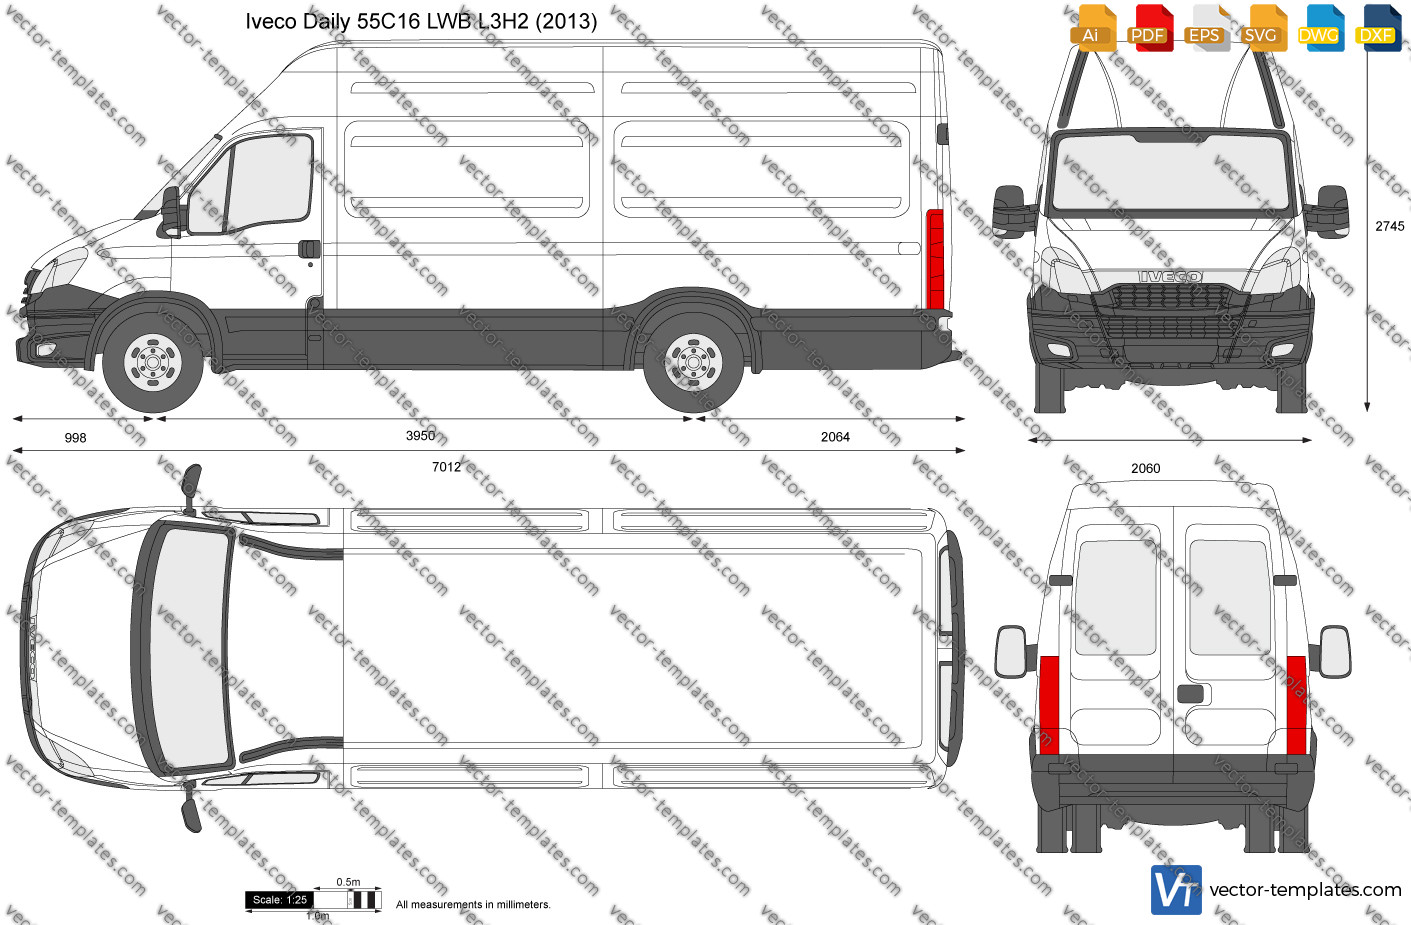 Templates - Cars - Iveco - Iveco Daily 55C16 LWB L3H2